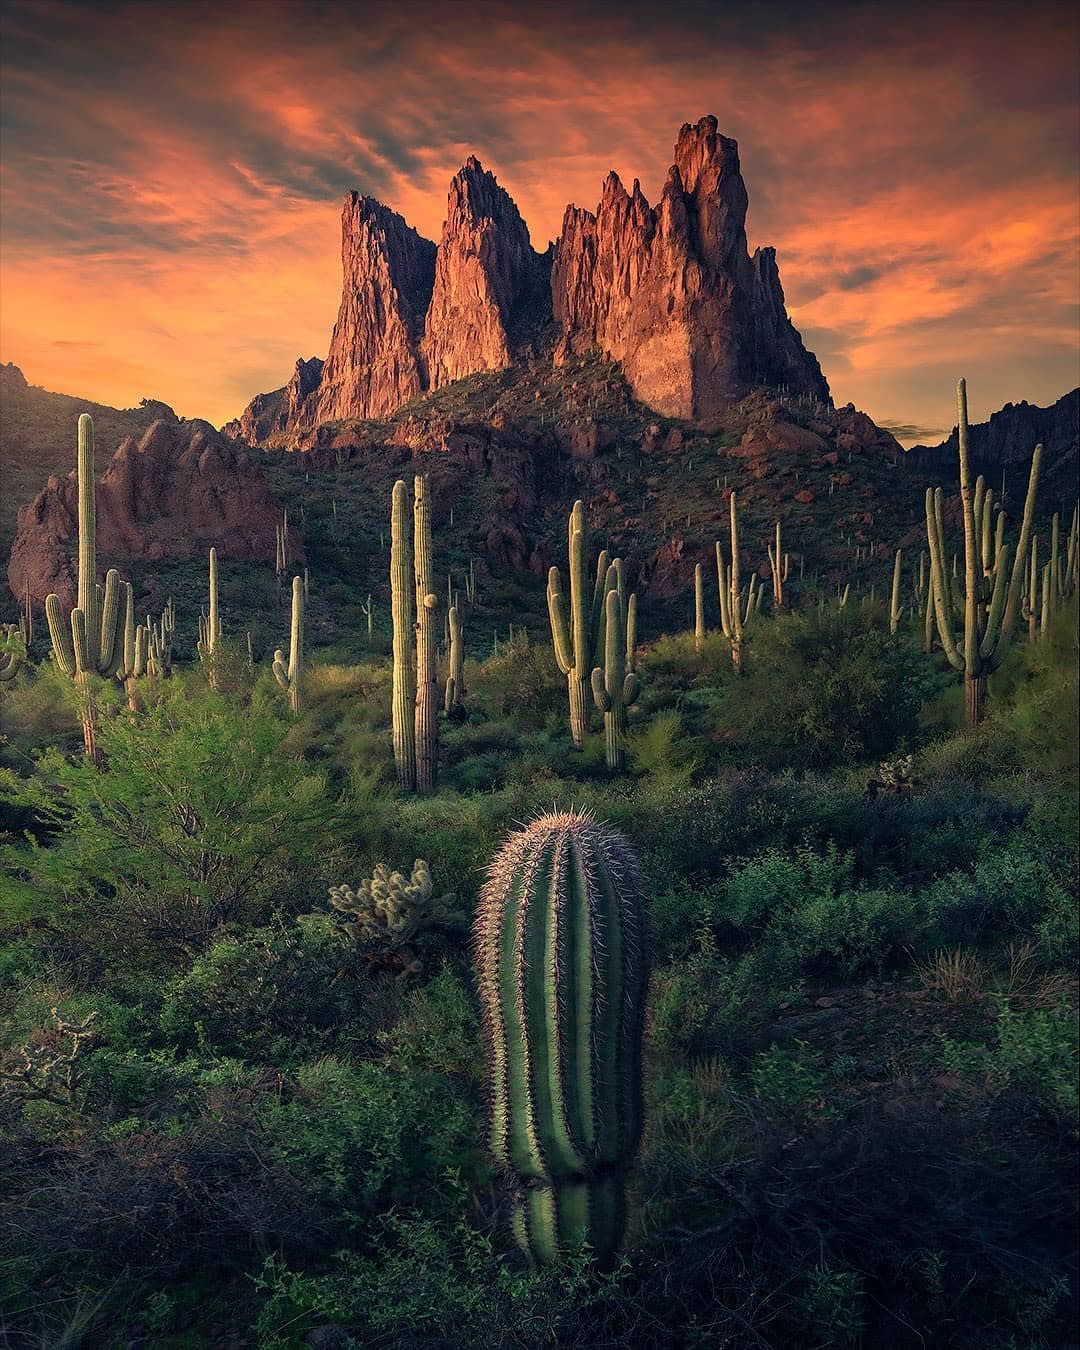 The Guardians of the Superstition mountains, Arizona (photo Max Rive)